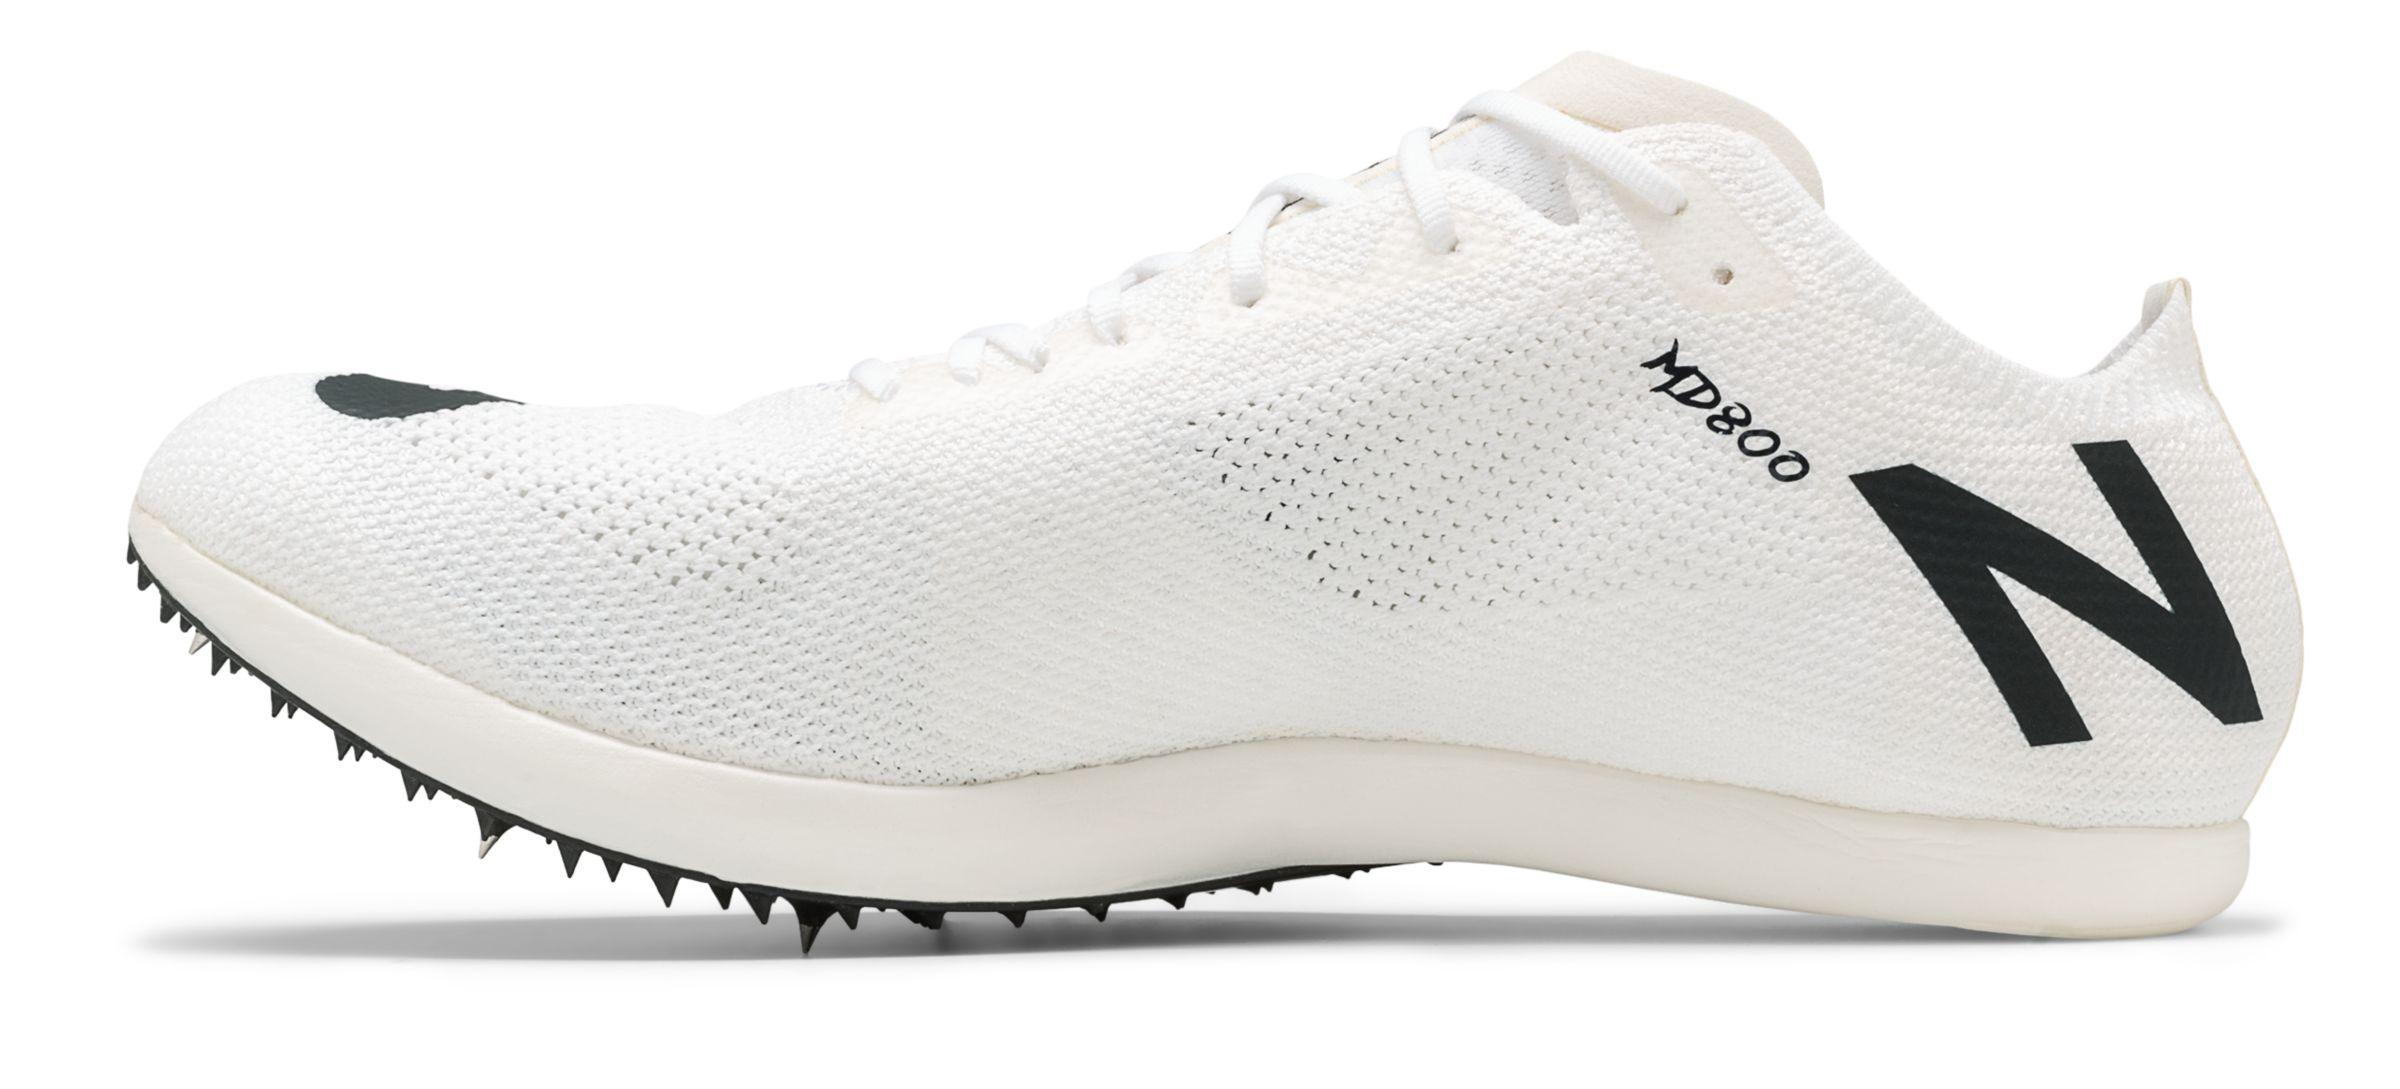 New Balance Fuelcell Md-x Track Spikes Shoes in White - Lyst